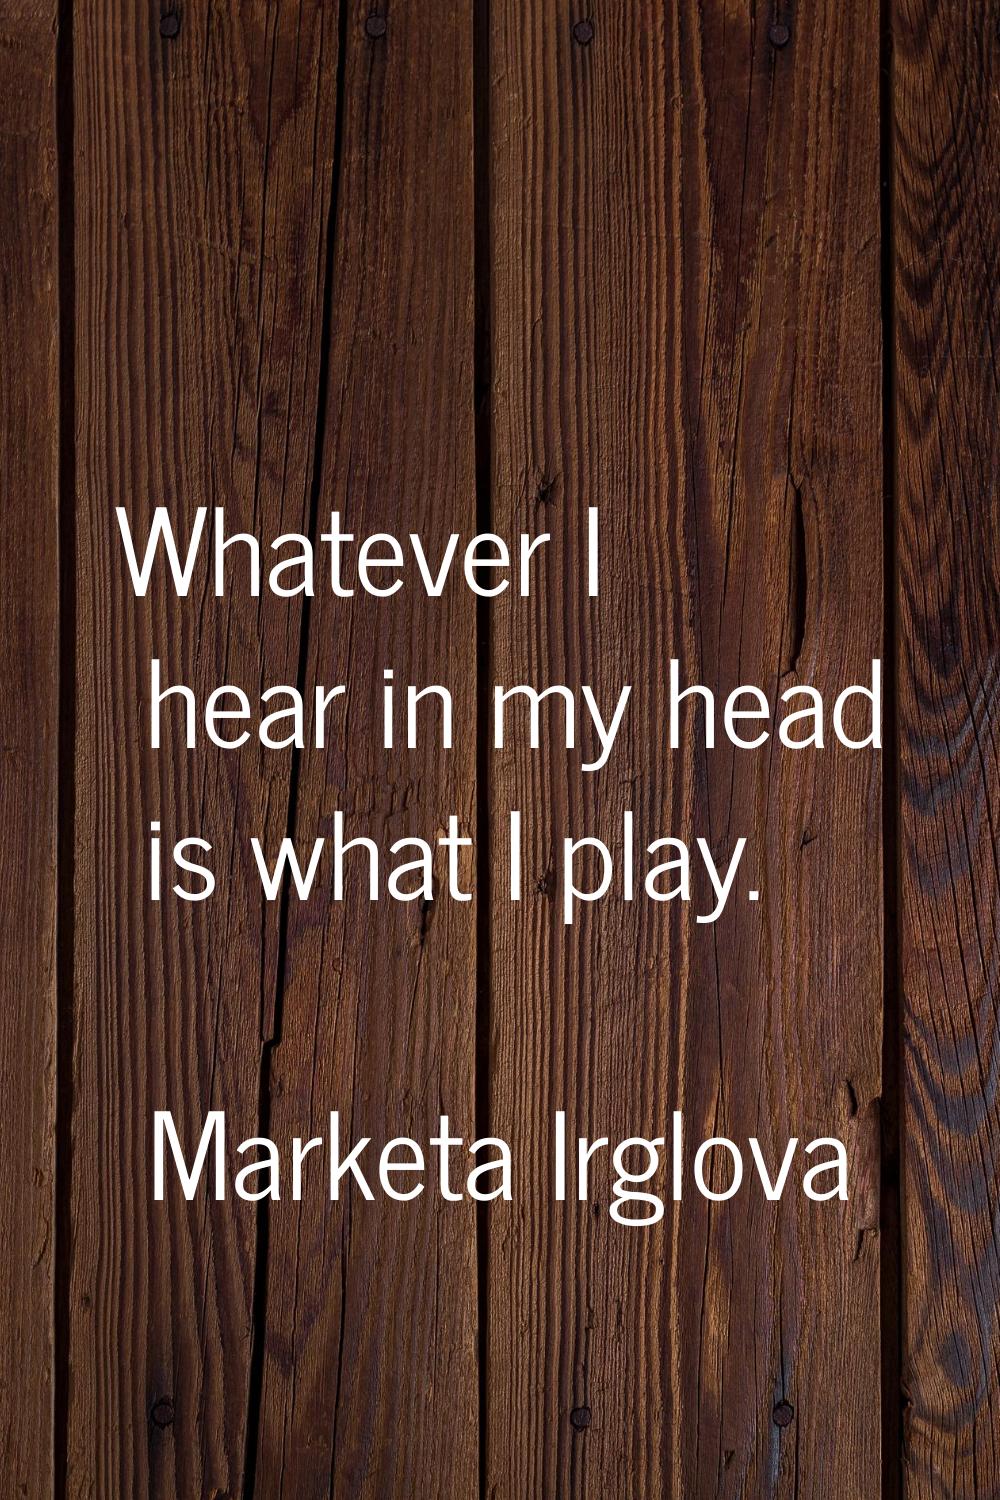 Whatever I hear in my head is what I play.